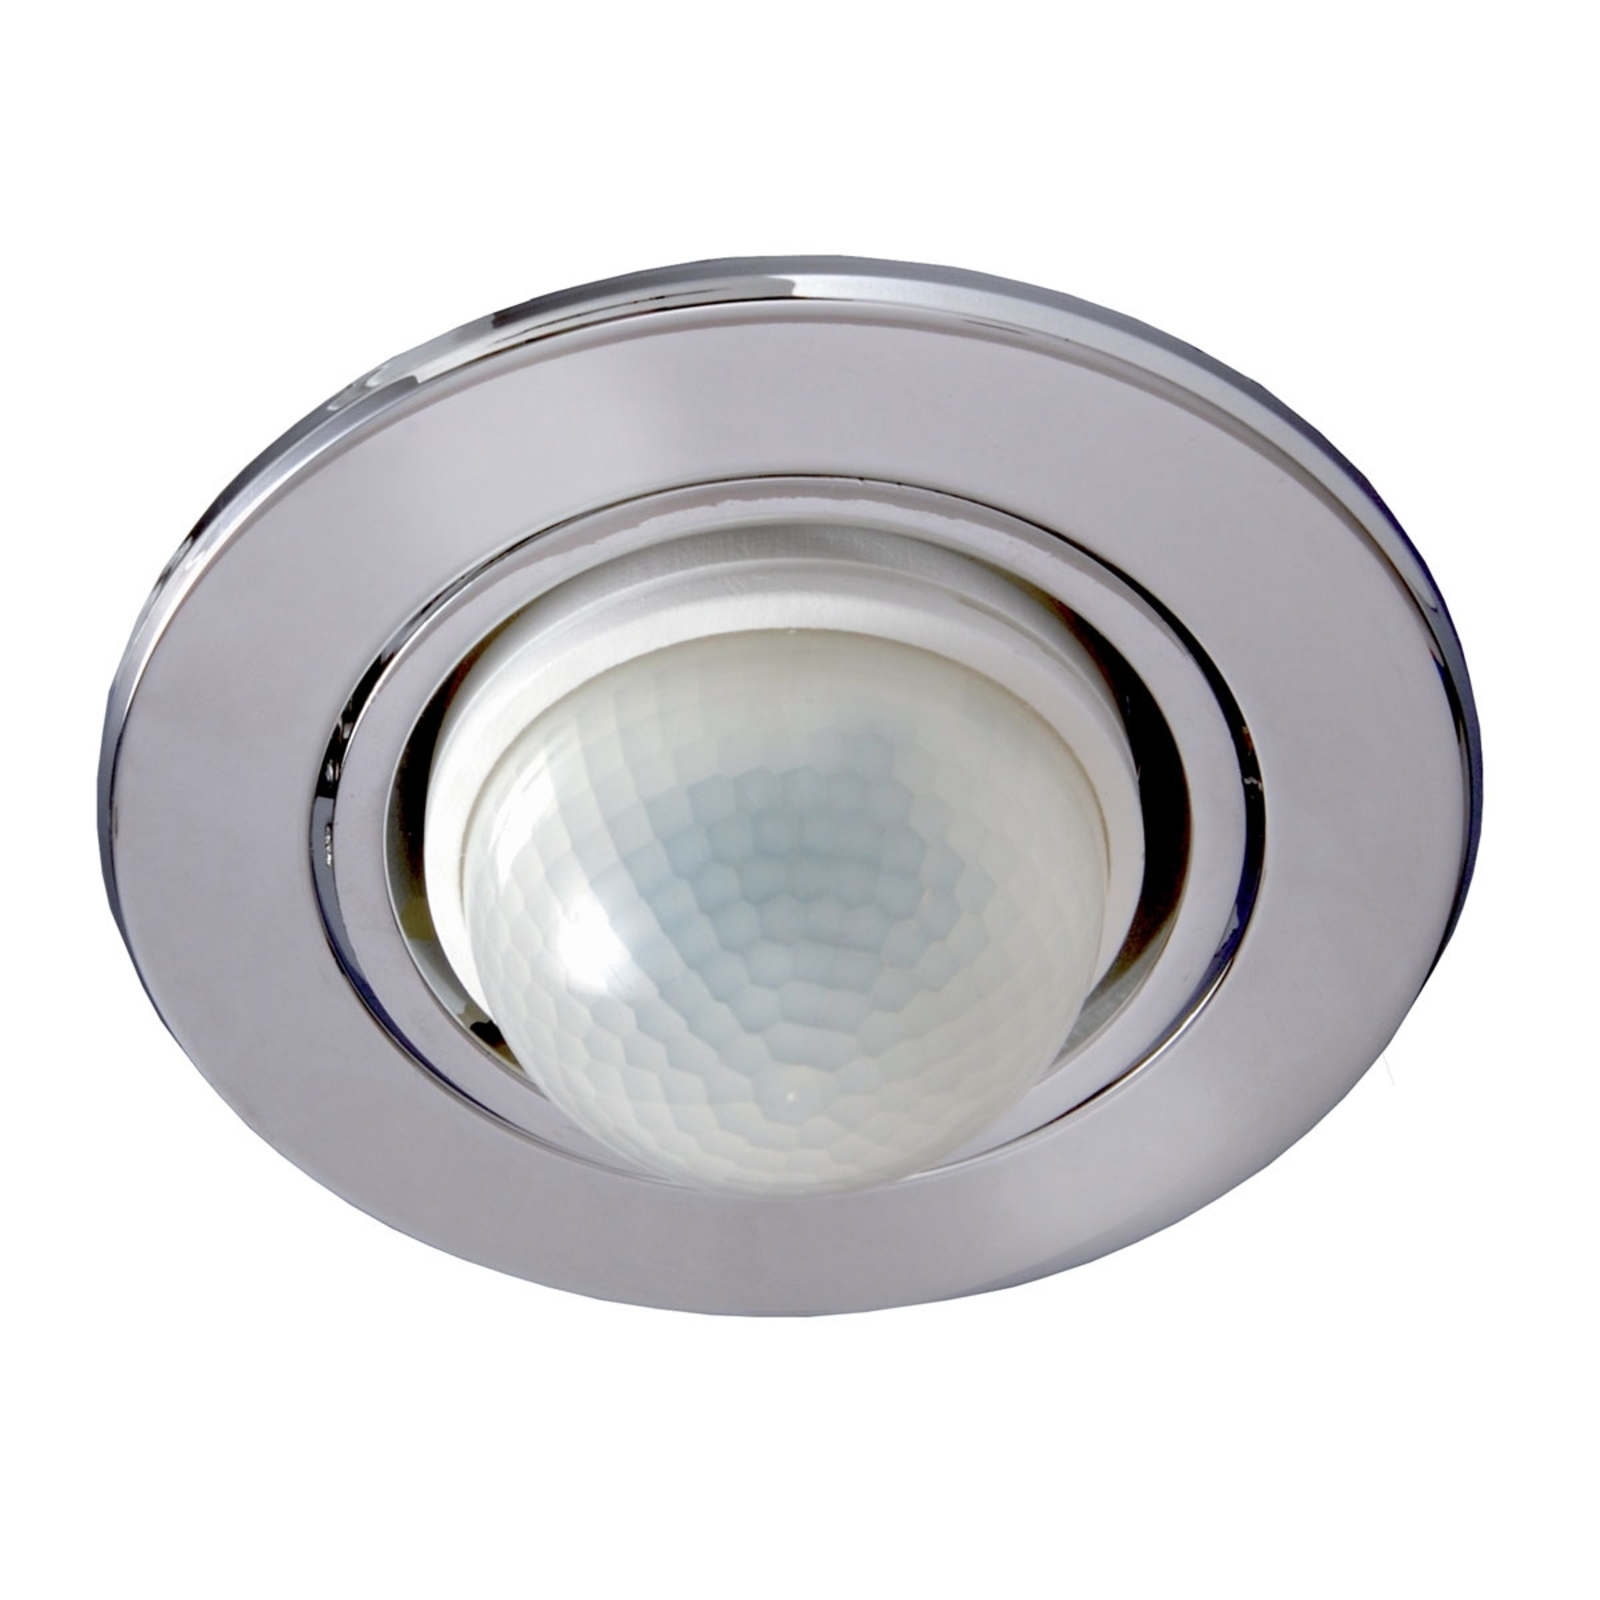 STEINEL IS D360 infrared recessed sensor, white